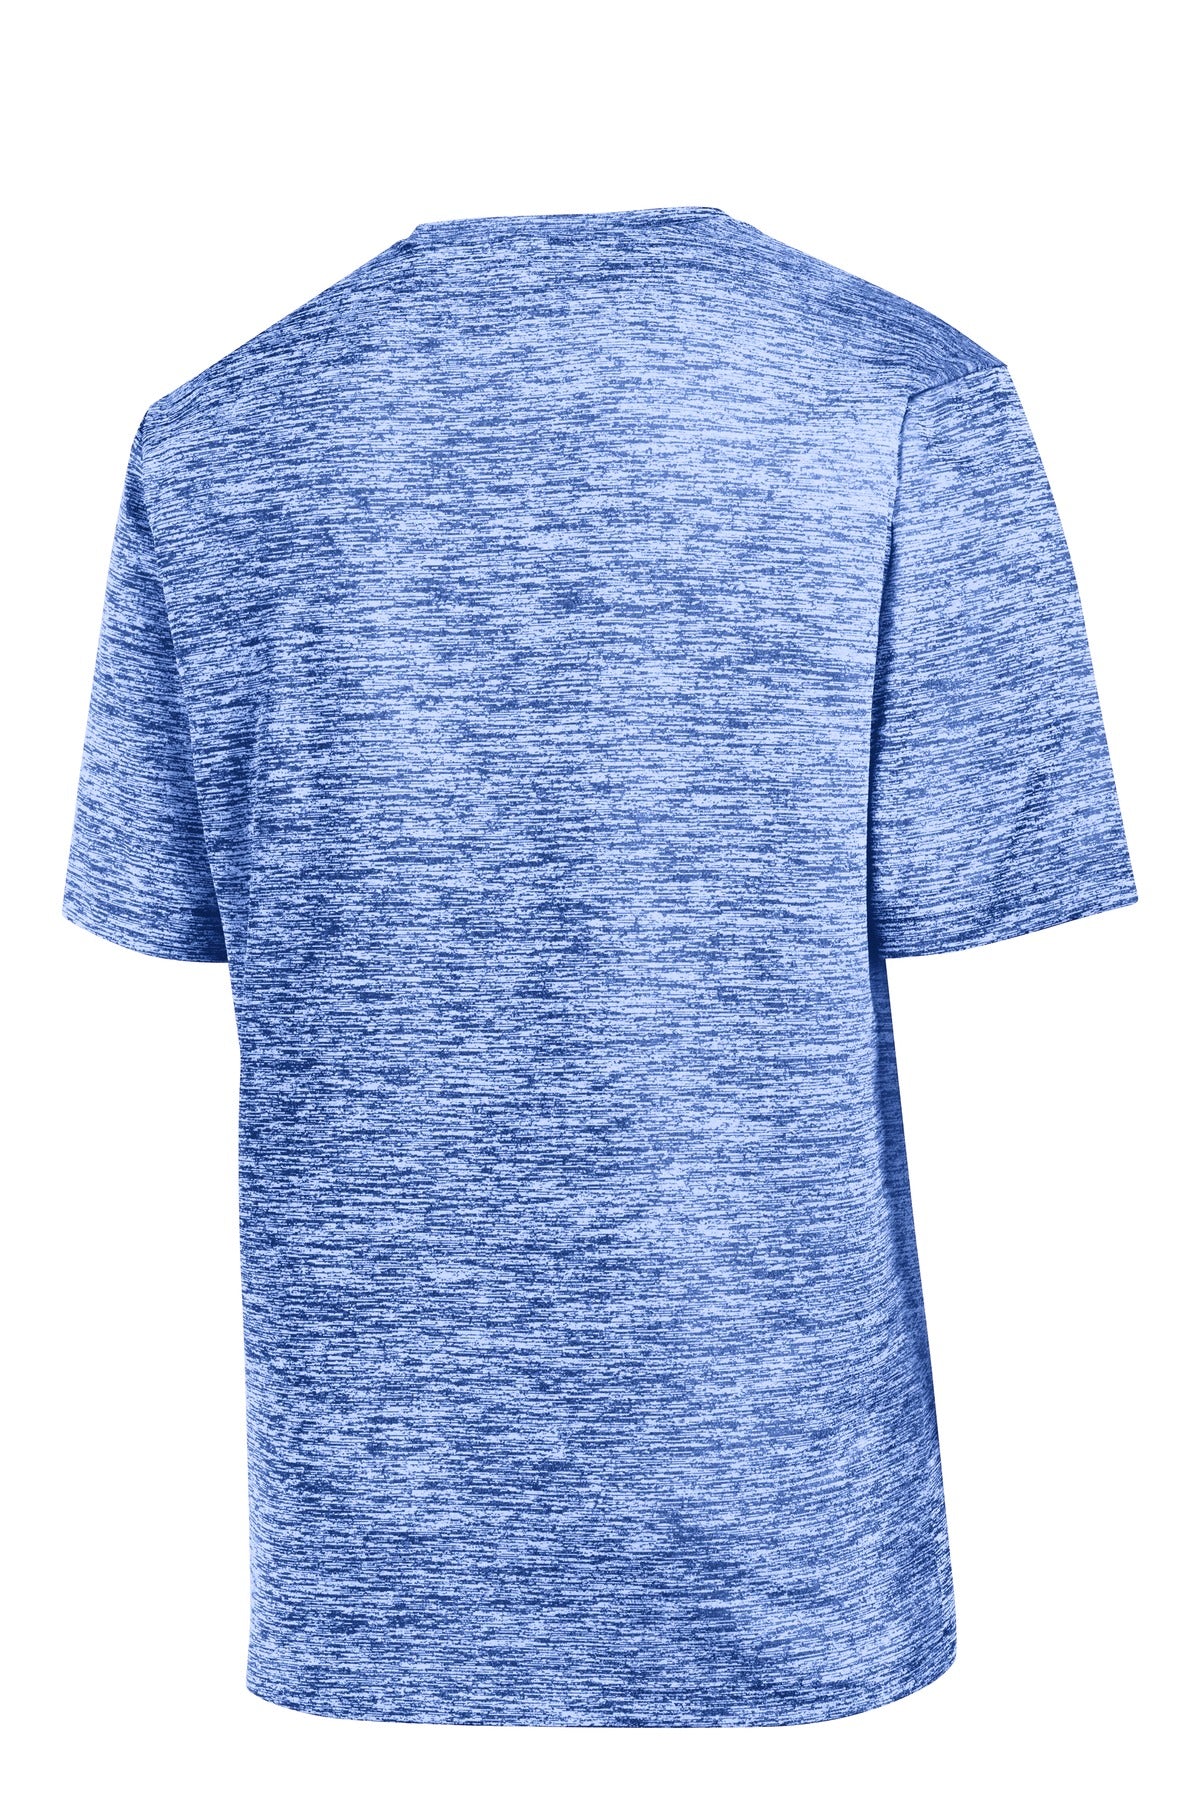 Sport-Tek Youth PosiCharge Electric Heather Tee. YST390